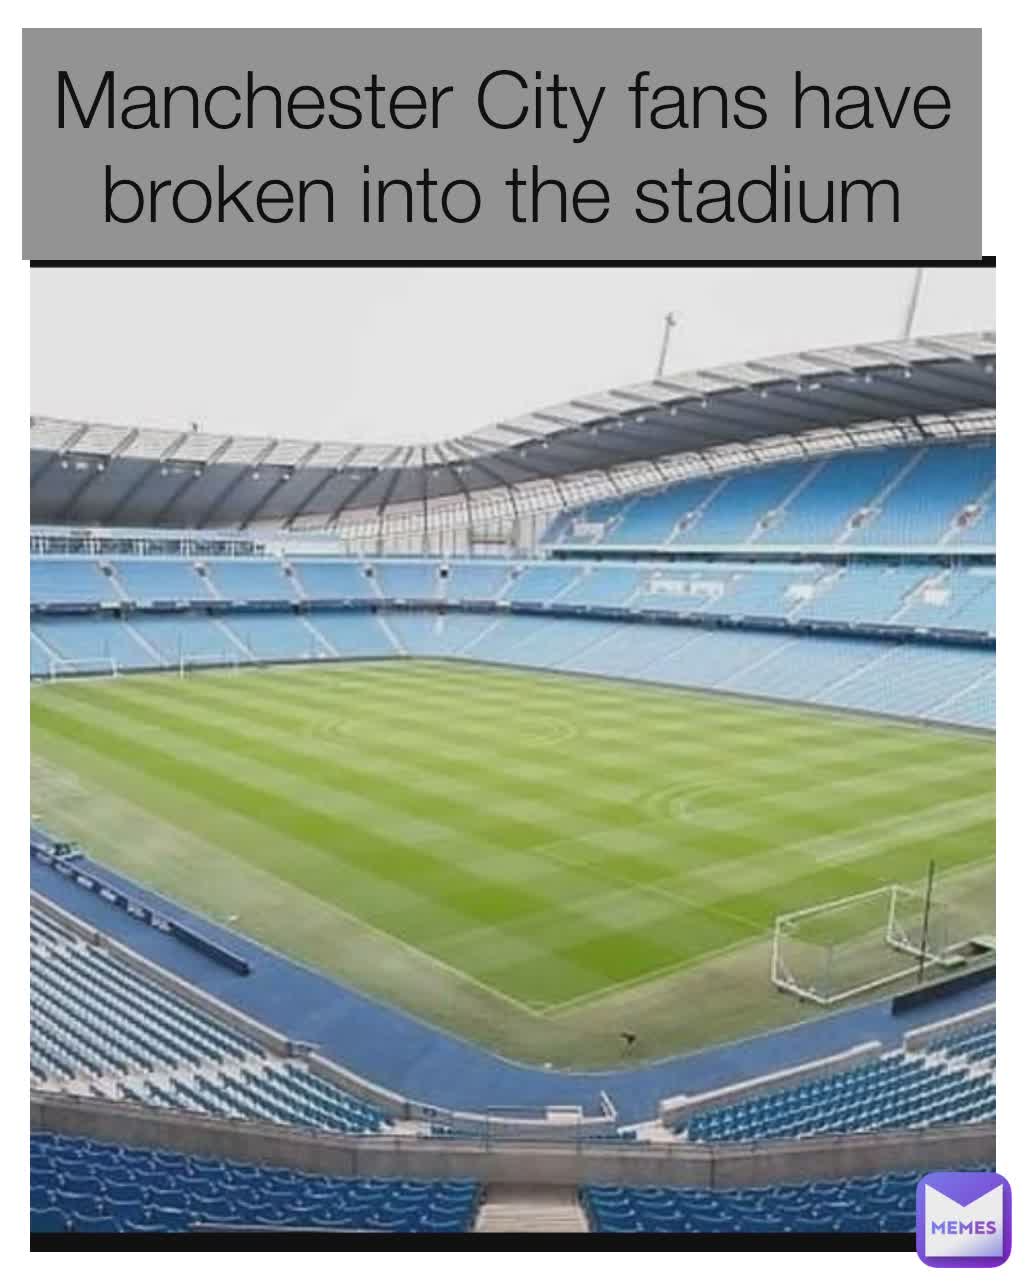 Manchester City fans have broken into the stadium
